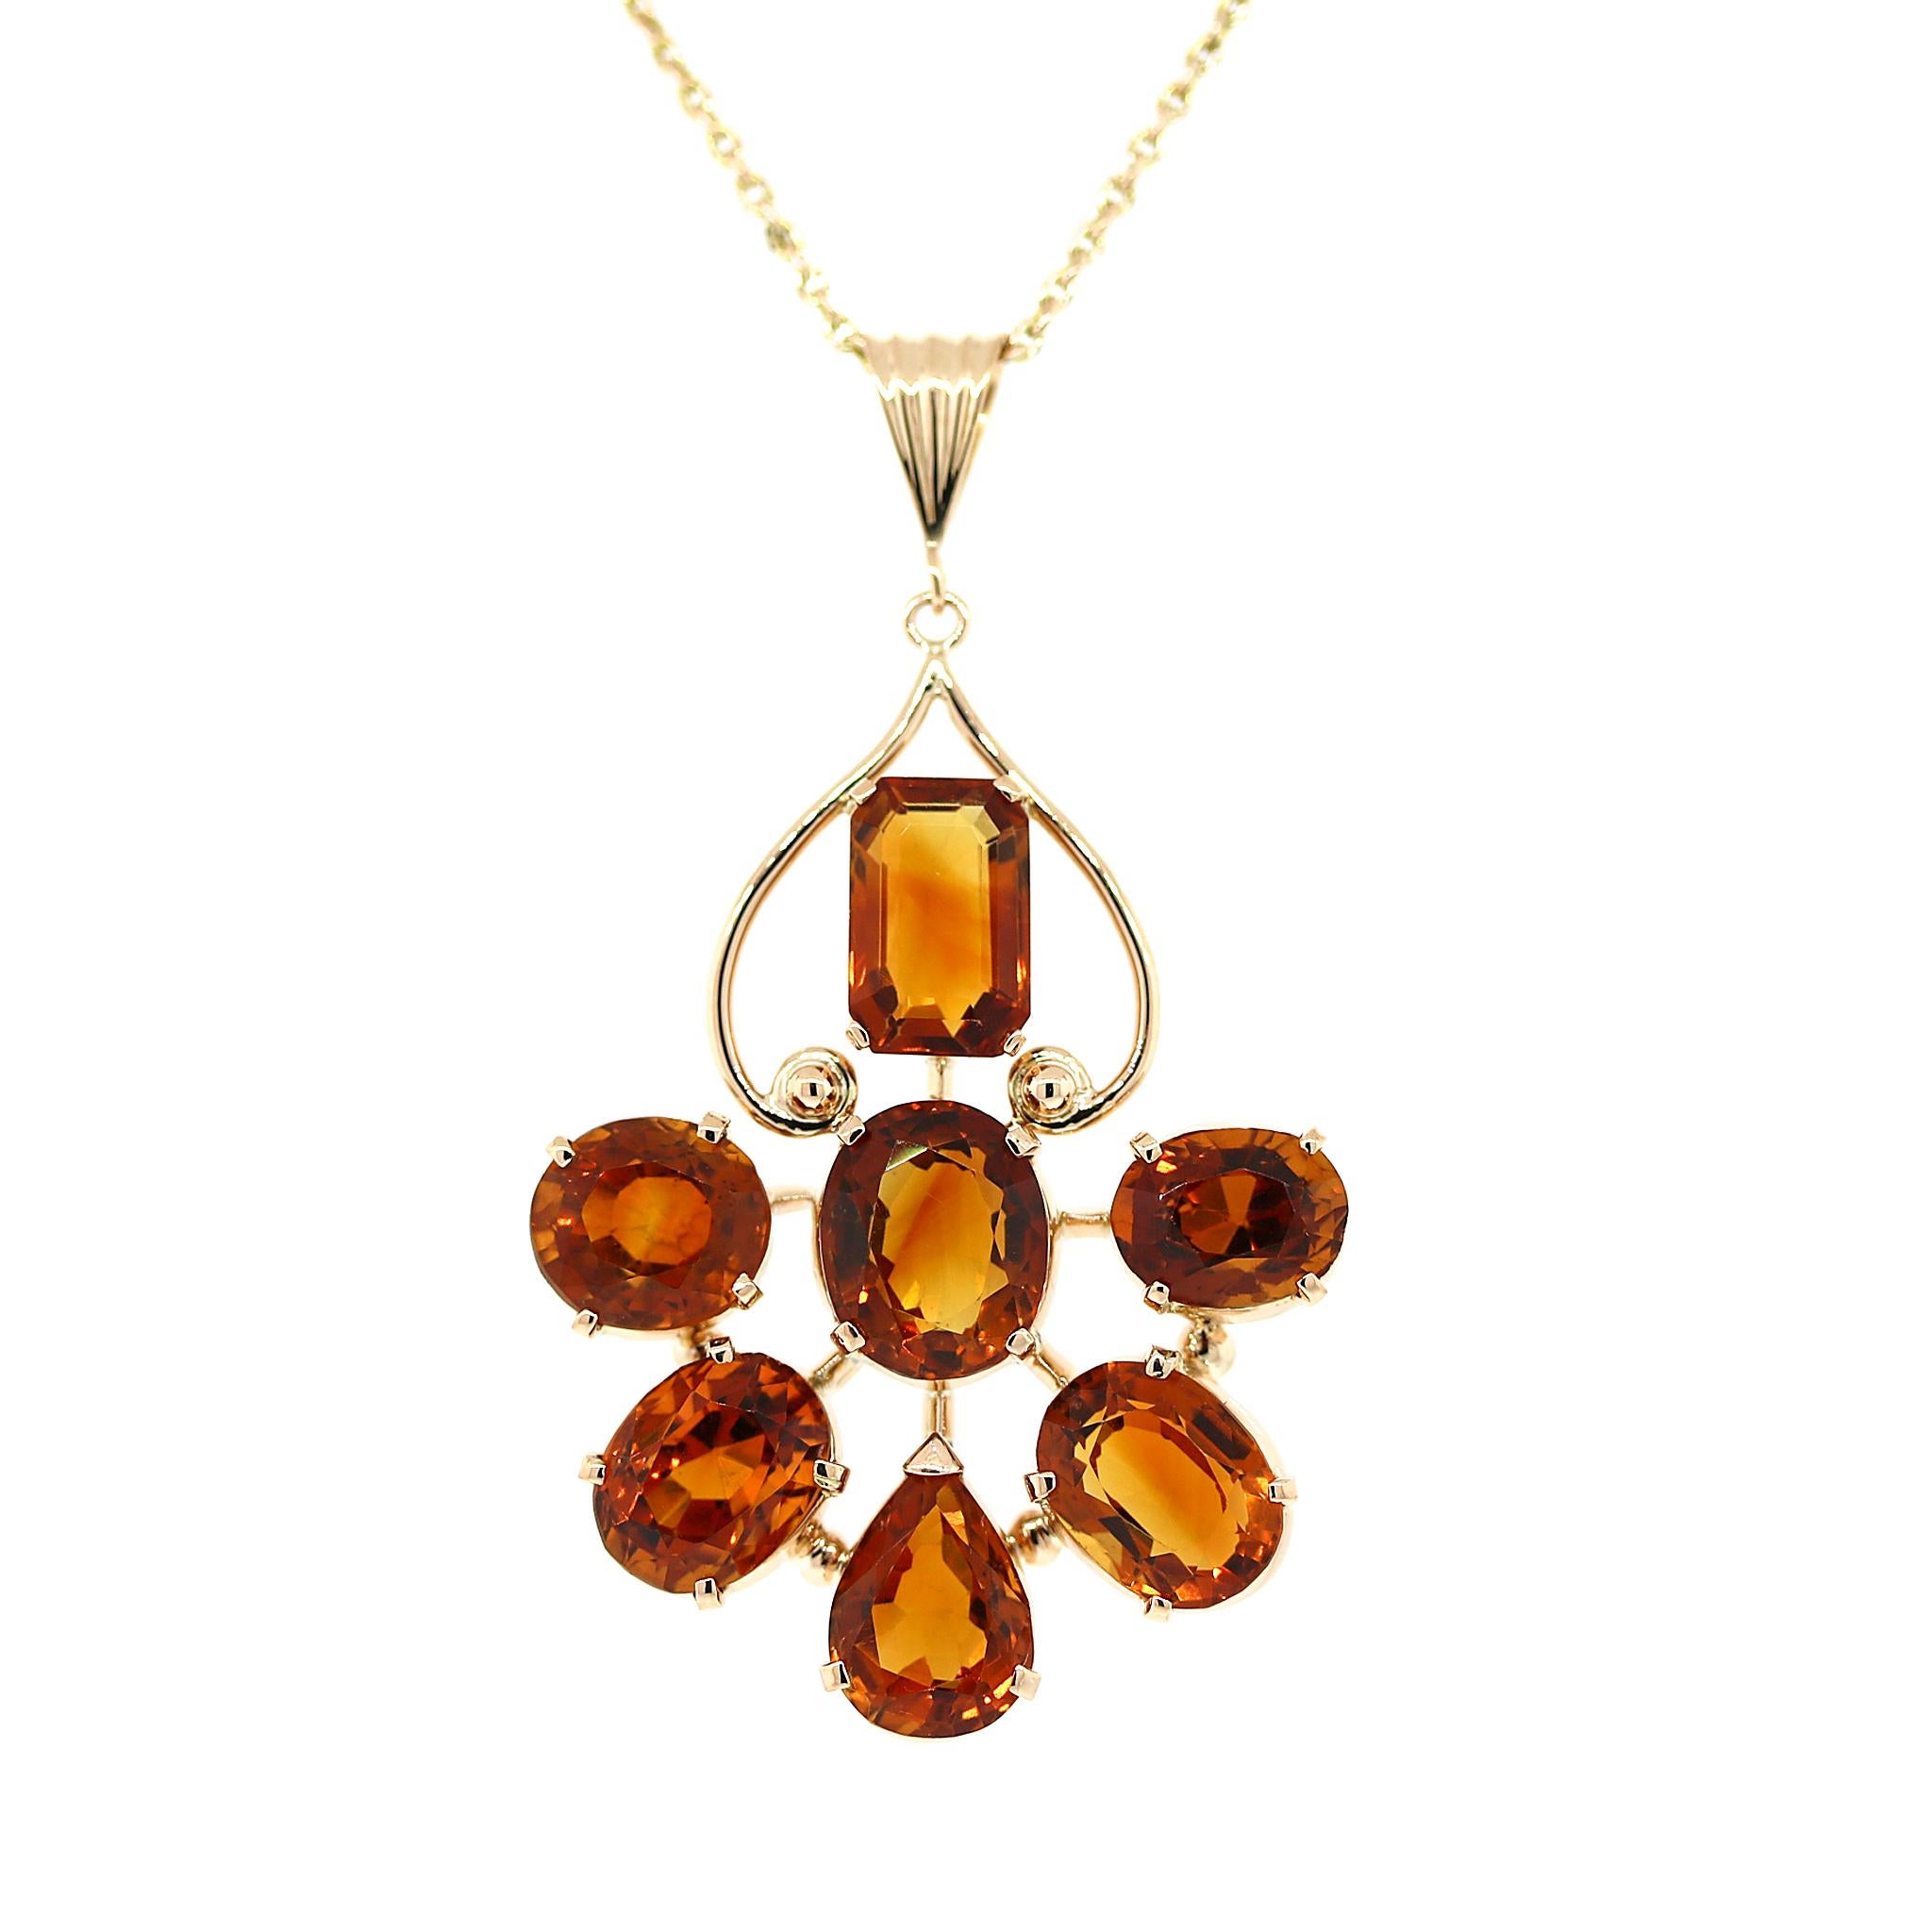 14 kt Yellow Gold
Citrine: 15 tcw (estimated)
Chain Length: 16 inches
Pendant Length: 2 inches
Total Weight: 15.81 grams